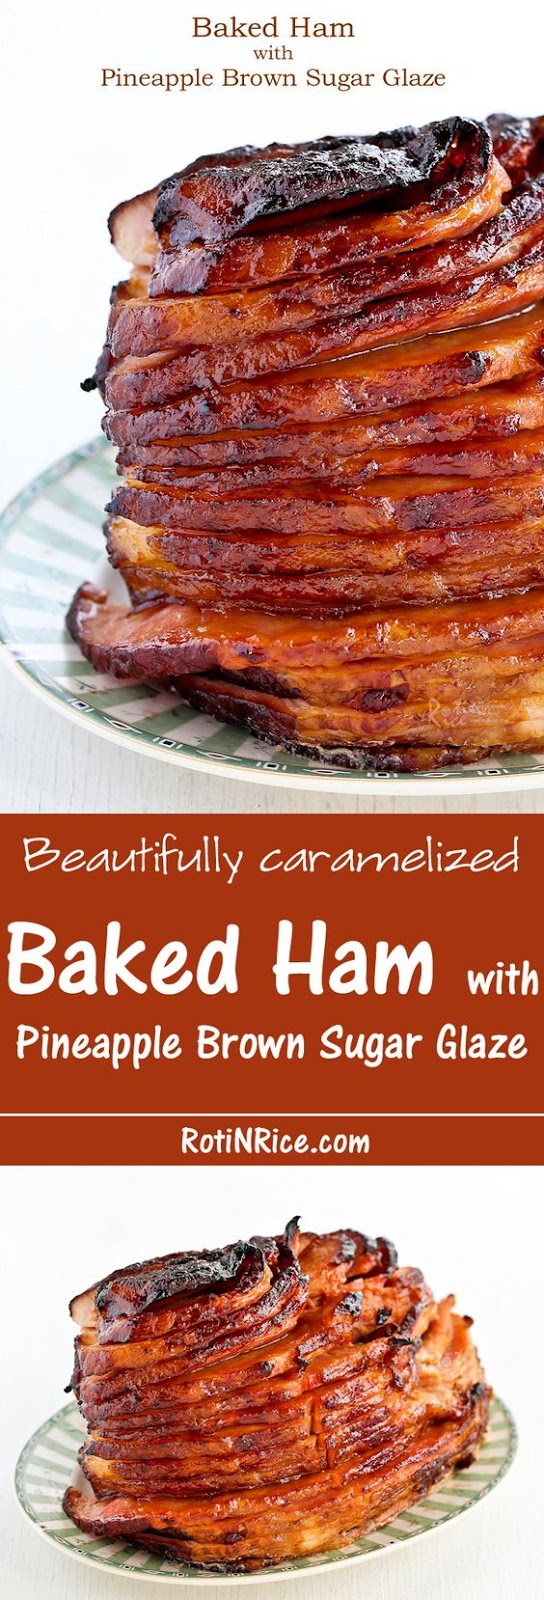 BAKED HAM WITH PINEAPPLE BROWN SUGAR GLAZE